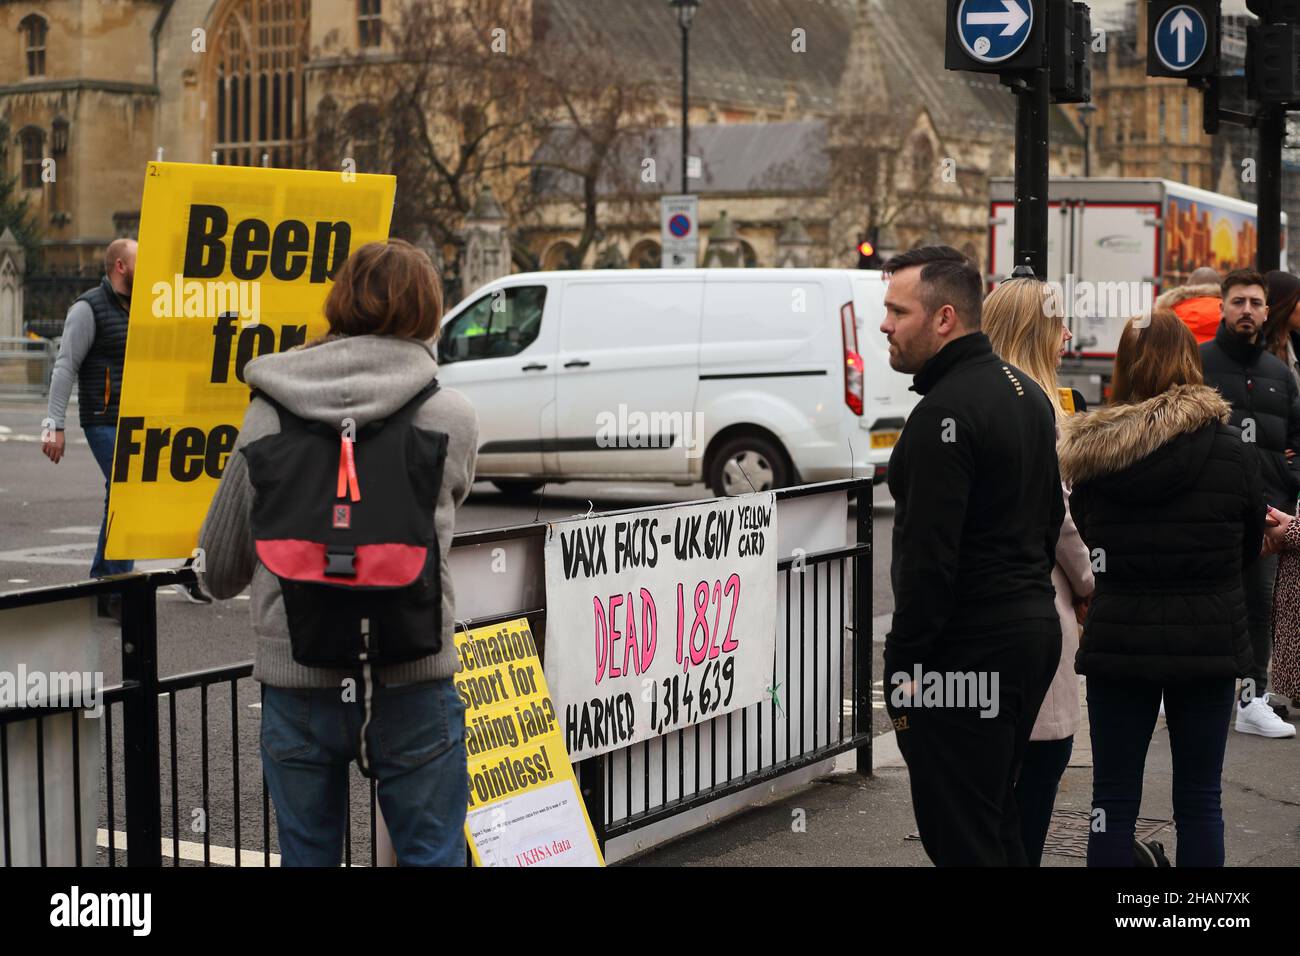 London, UK. 14th Dec, 2021. A small group of anti-vaxxers demonstrate in Parliament Square in protest against Covid vaccinations. Credit: Uwe Deffner/Alamy Live News Stock Photo